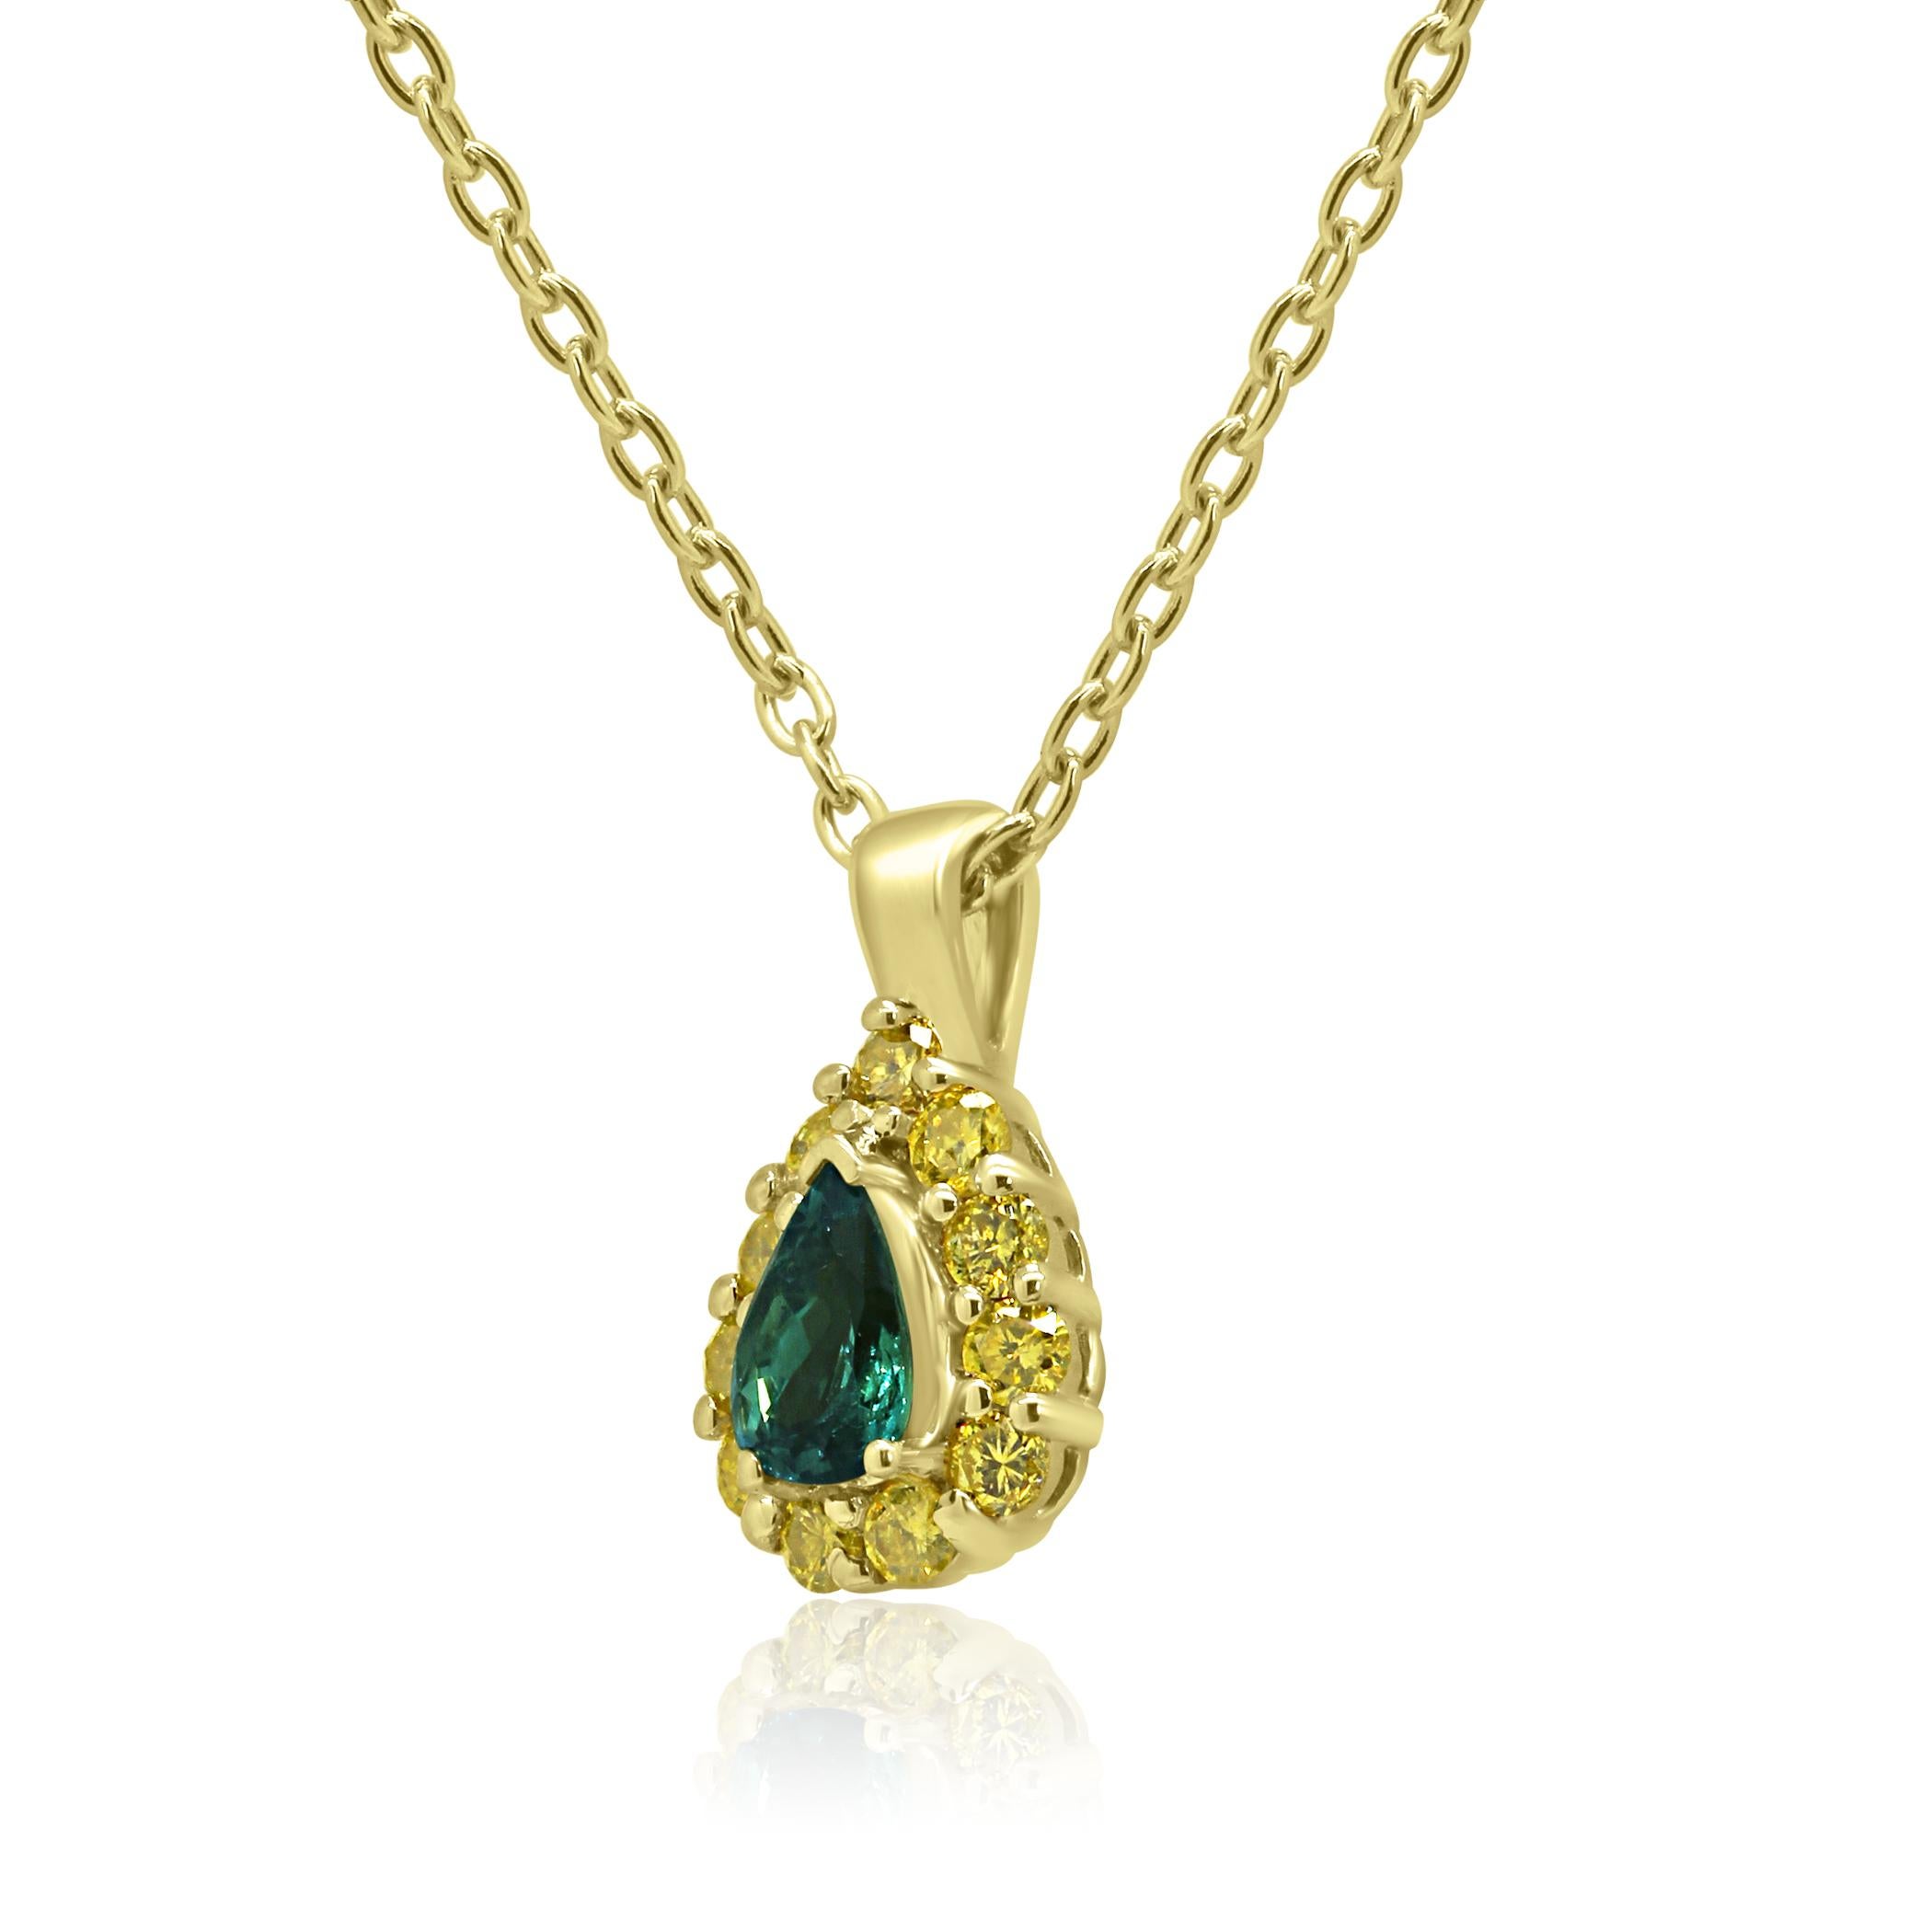 Alexandrite Pear Shape 0.44 Carat encircled in a Single Halo of Natural Fancy Yellow Round Diamond 0.33 Carat in Stunning 14K Yellow Gold Pendant Necklace.

MADE IN USA
Center Alexandrite Weight 0.44 Carat
Total Stone Weight 0.77 Carat 